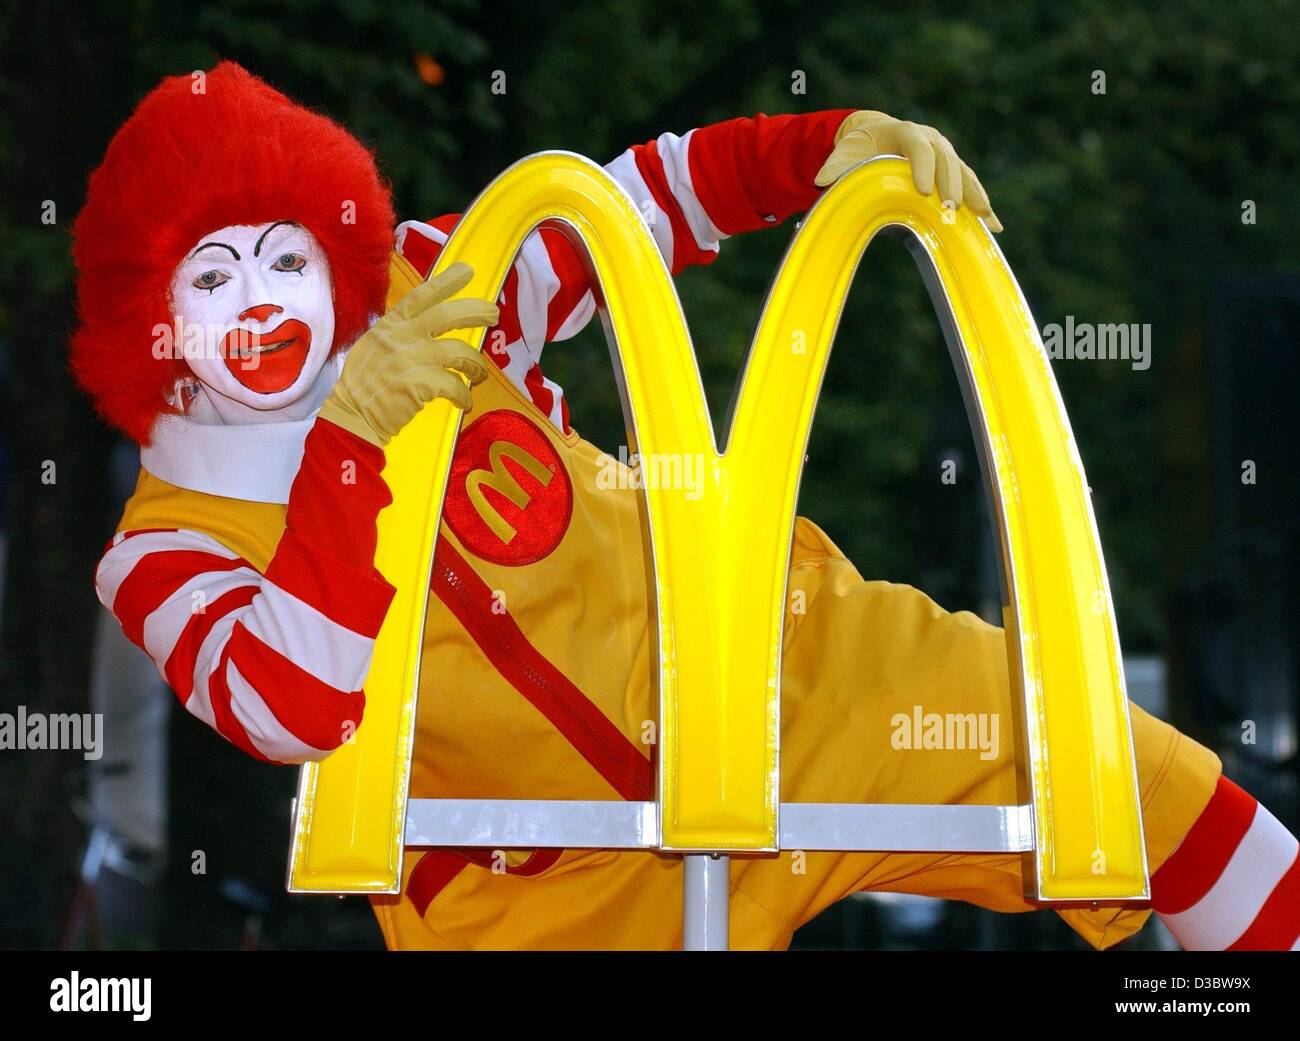 (dpa) - 'Ronald McDonald' poses behind the logo of the fast food chain McDonald's during a press conference in Munich, 2 September 2003. The slogan 'ich liebe es' ('i'm lovin' it') will soon make its way into the vocabulary of McDonald's customers in more than 100 countries as the Golden Arches laun Stock Photo